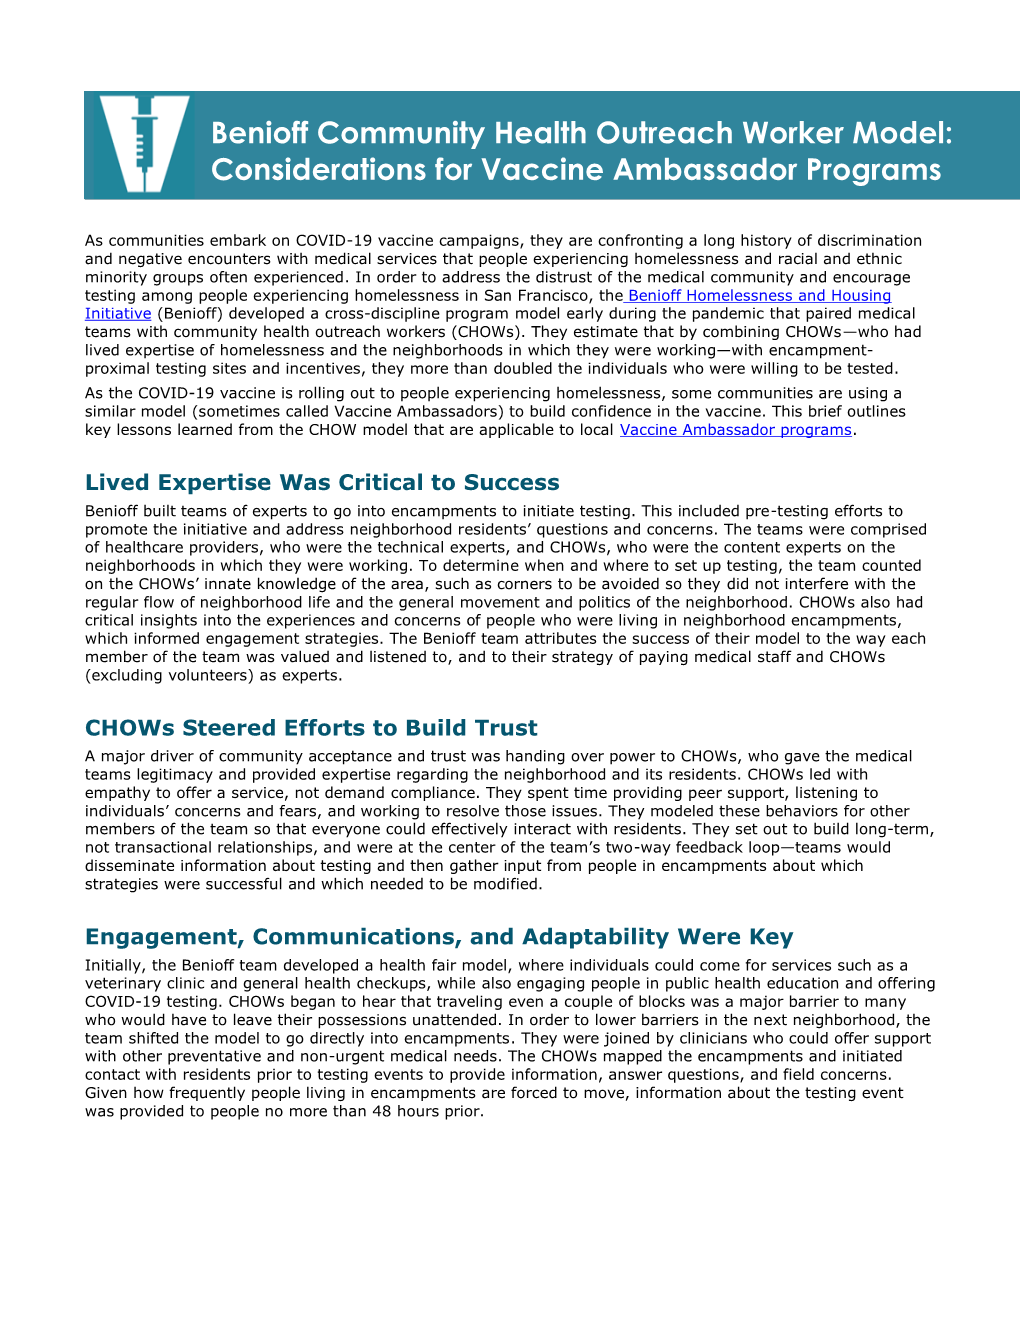 Benioff Community Health Outreach Worker Model: Considerations for Vaccine Ambassador Programs